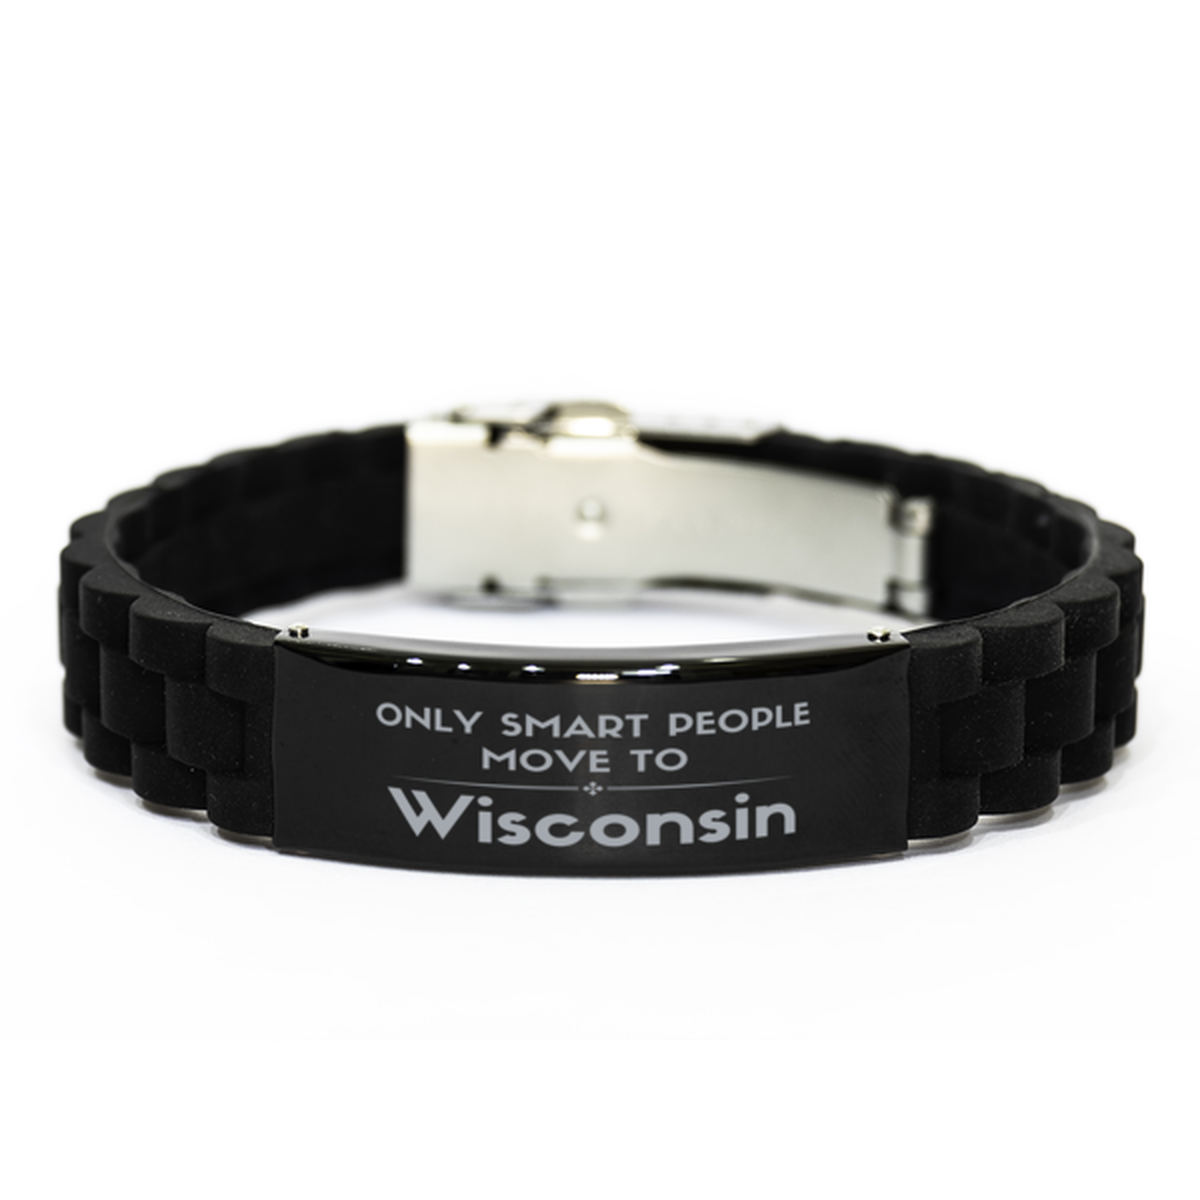 Only smart people move to Wisconsin Black Glidelock Clasp Bracelet, Gag Gifts For Wisconsin, Move to Wisconsin Gifts for Friends Coworker Funny Saying Quote